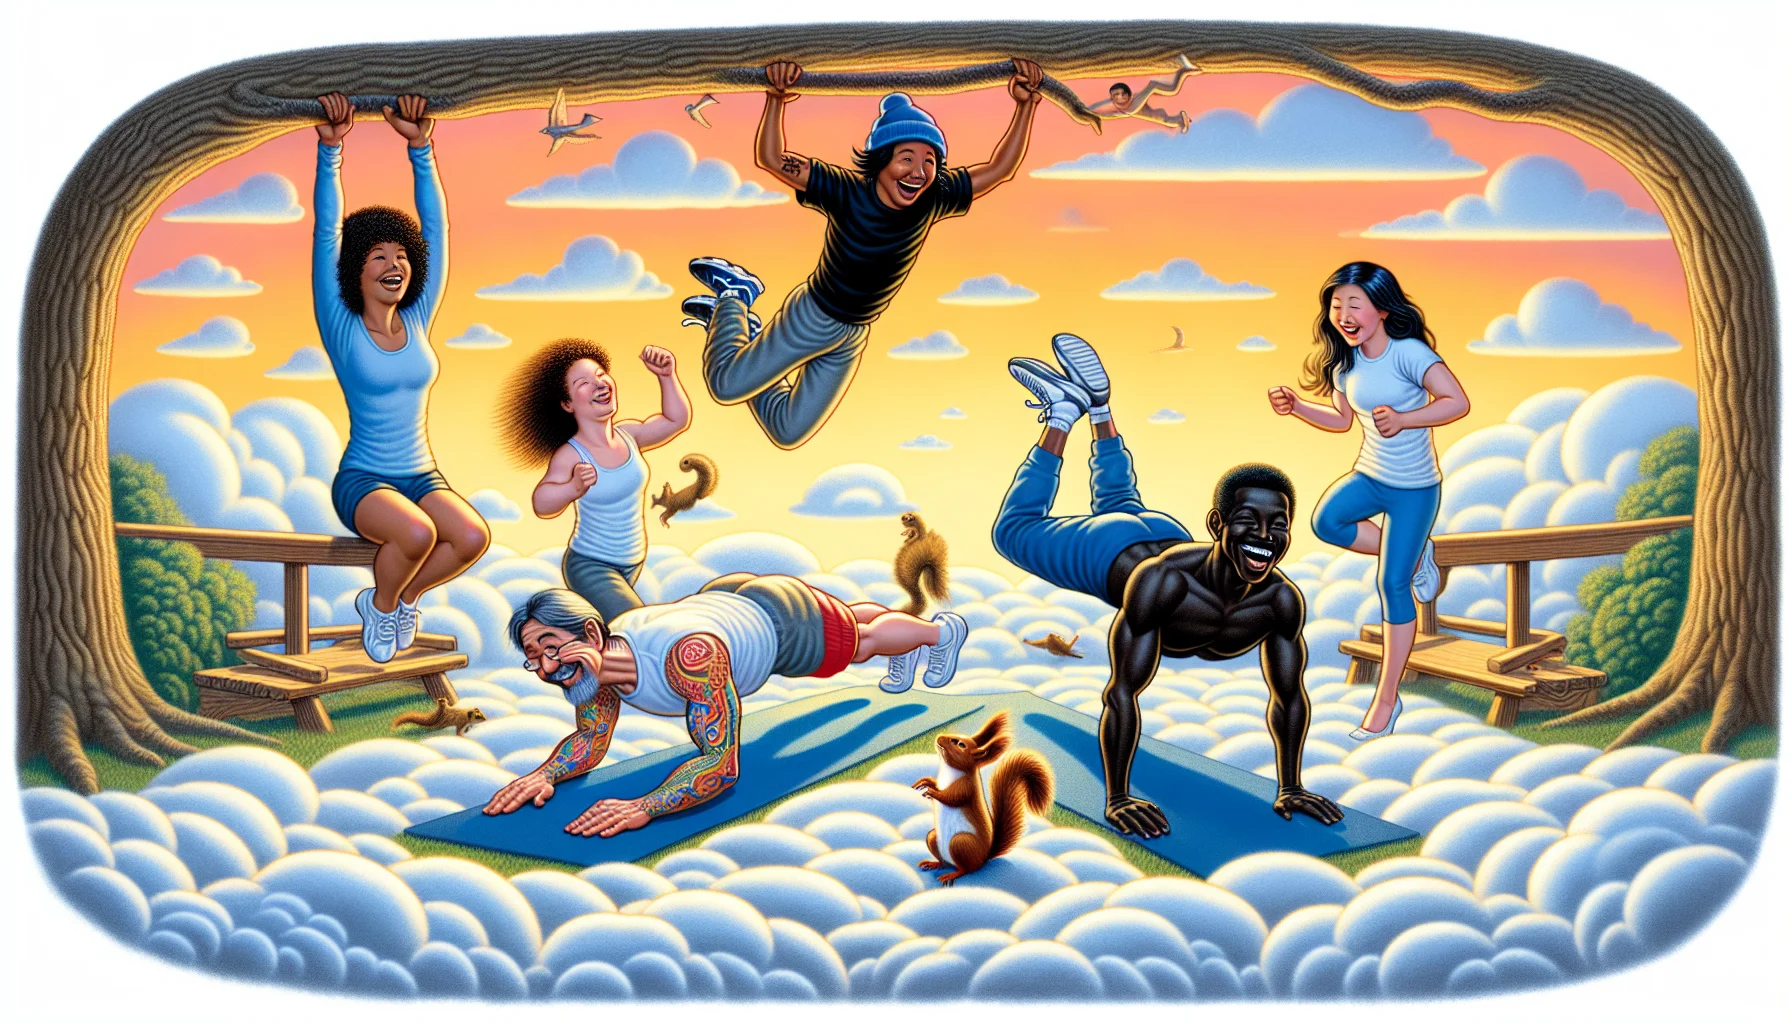 An entertaining illustration promoting exercise, bordered by long fluffy clouds, features four individuals of different descents - a Caucasian female, a Hispanic male, a Black male and a Middle-Eastern female. Each of them perform traditional calisthenics warm-up moves in a whimsical outdoor setting. The sky is streaked with a warm orange sunset and the Hispanic male, attempting a handstand, finds his feet tangled in a tree branch. The Black male is laughing as he performs push-ups with a squirrel on his back. The Caucasian and Middle-Eastern females are doing jumping jacks, chuckling as they inadvertently nearly collide with each other.